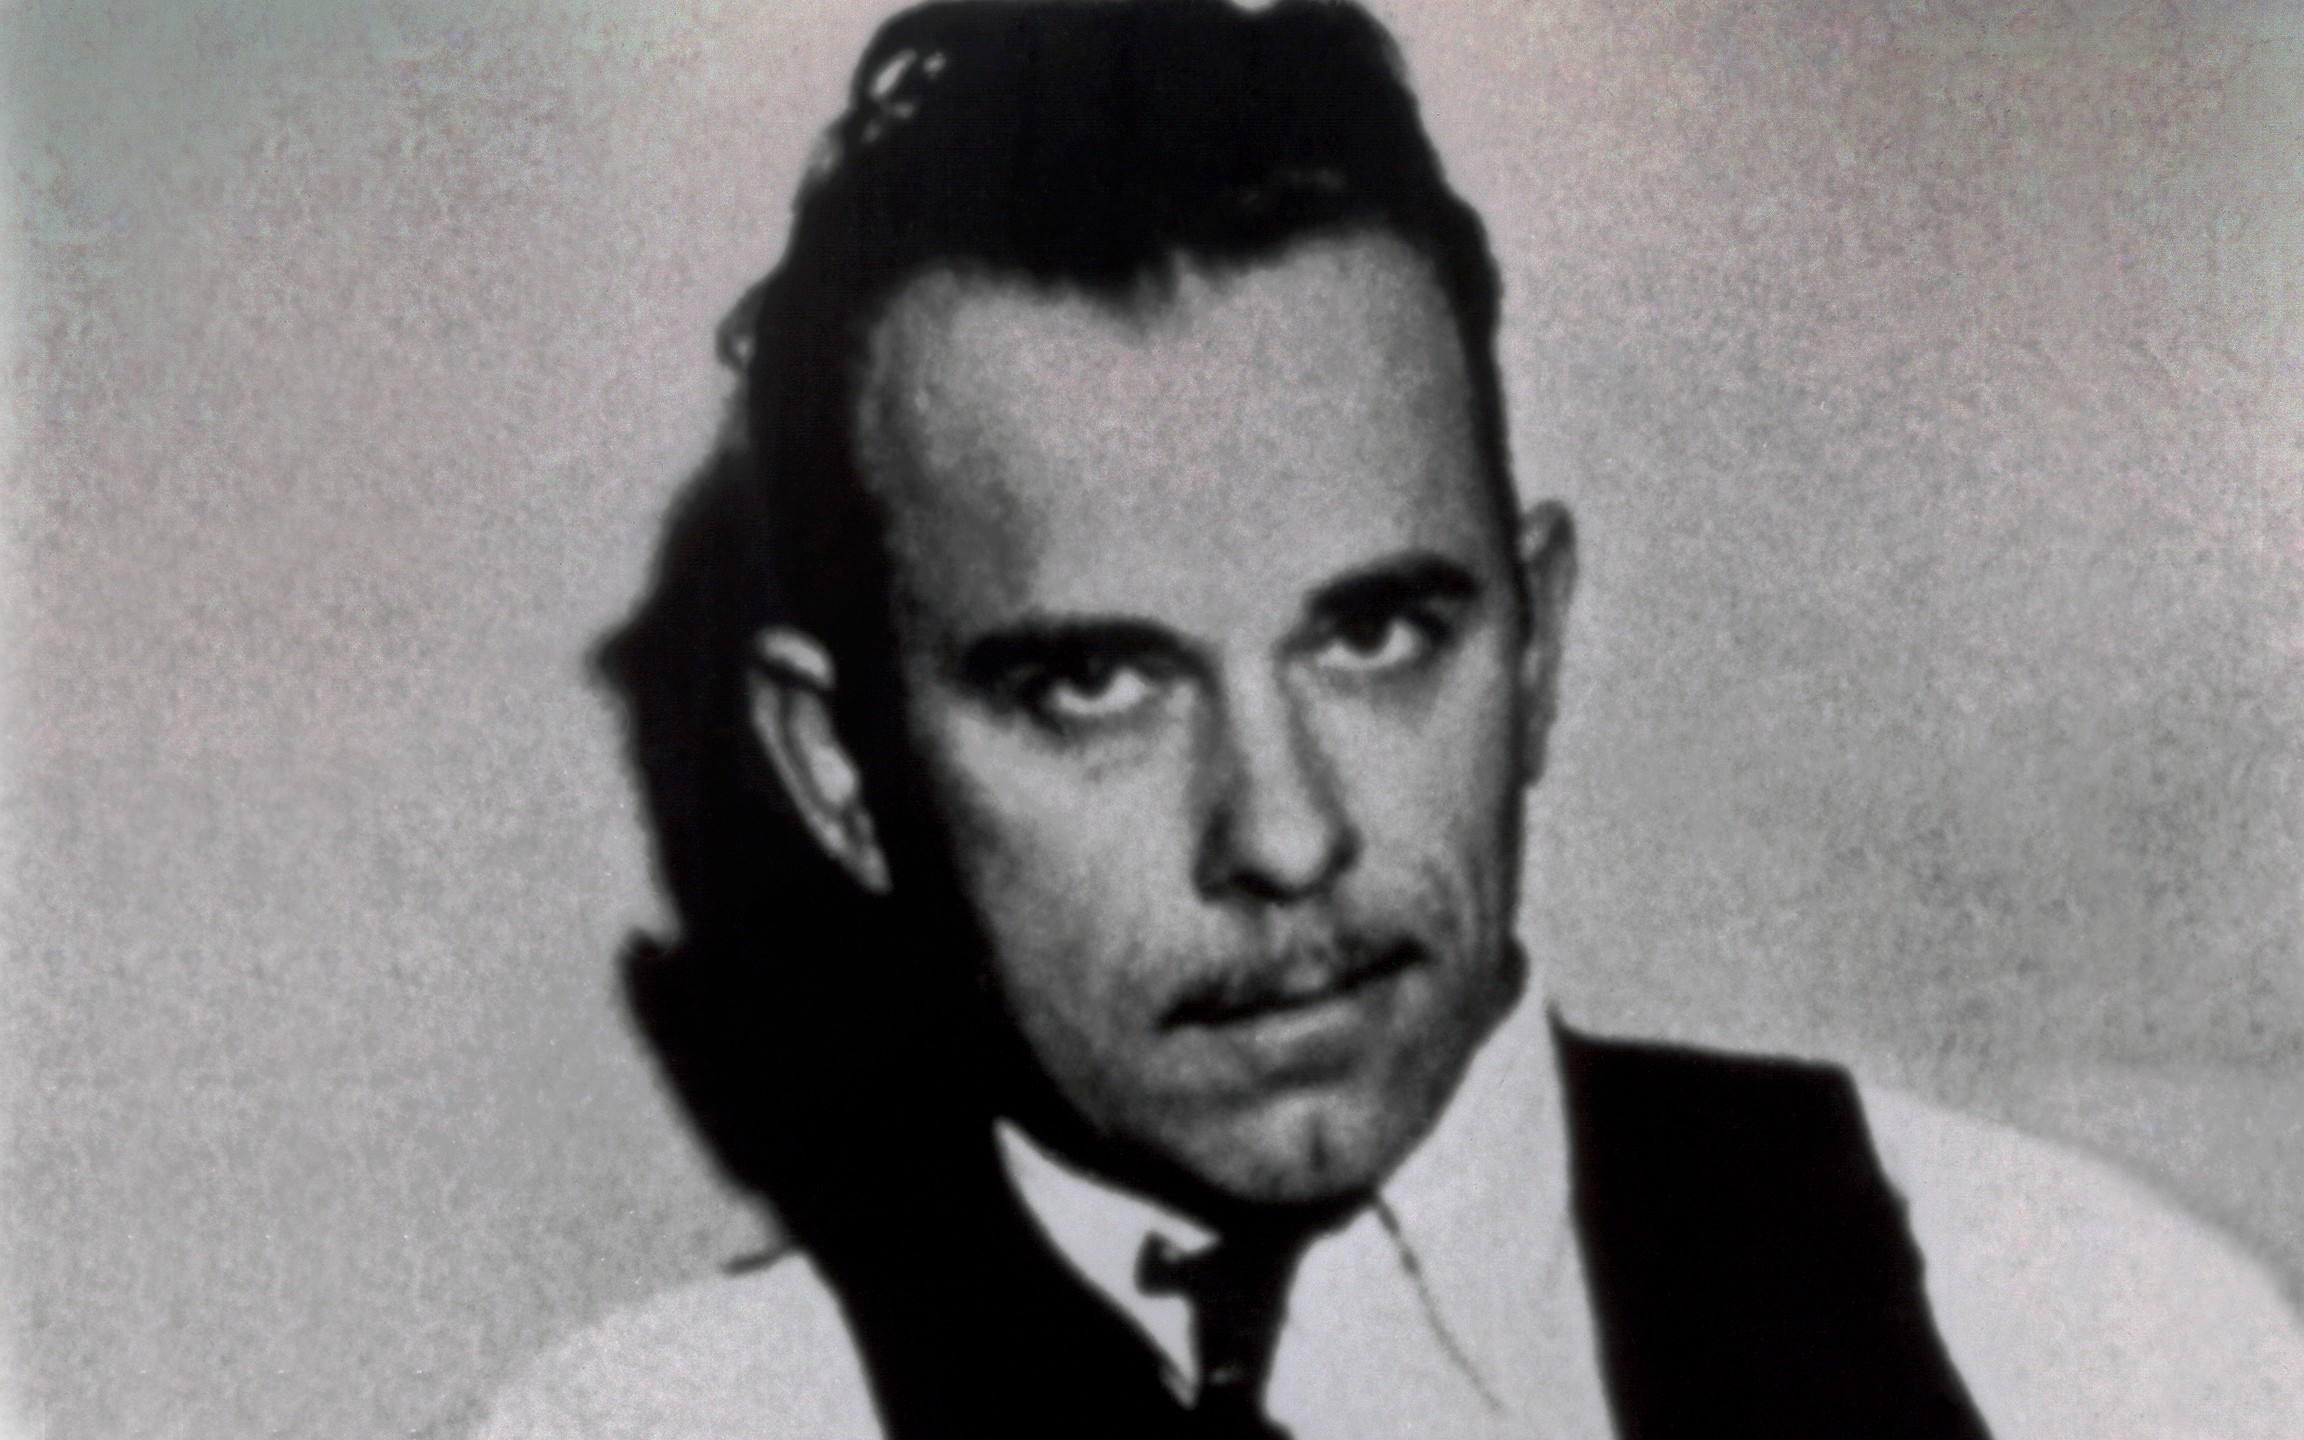 Dillinger Captured in Tucson  Pima County Public Library